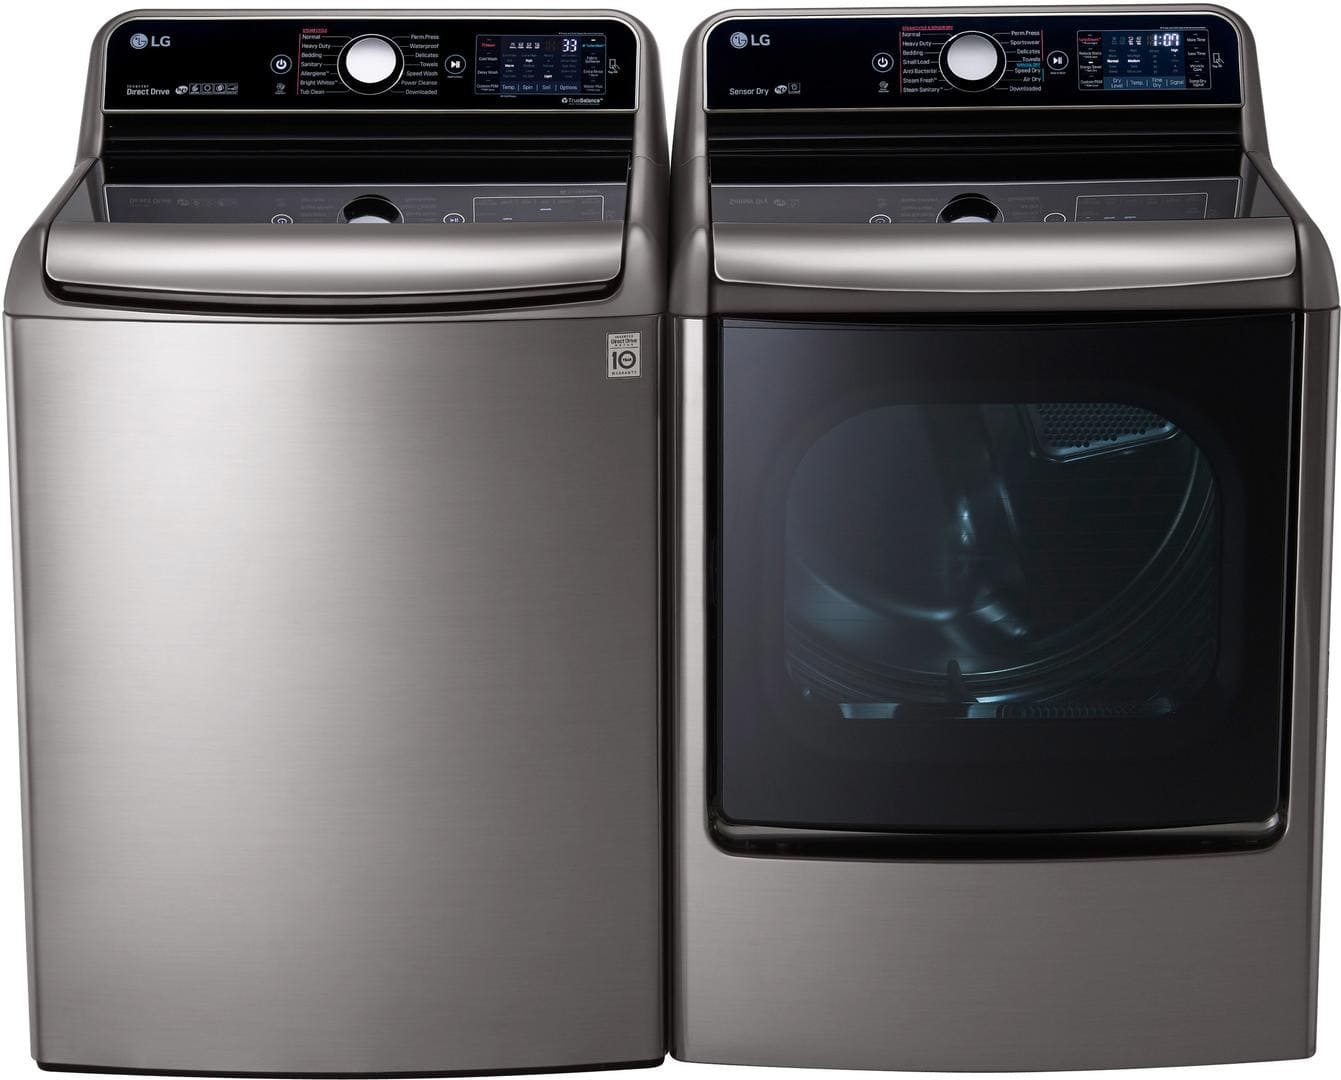 lg-lgwadrgv32-side-by-side-washer-dryer-set-with-top-load-washer-and